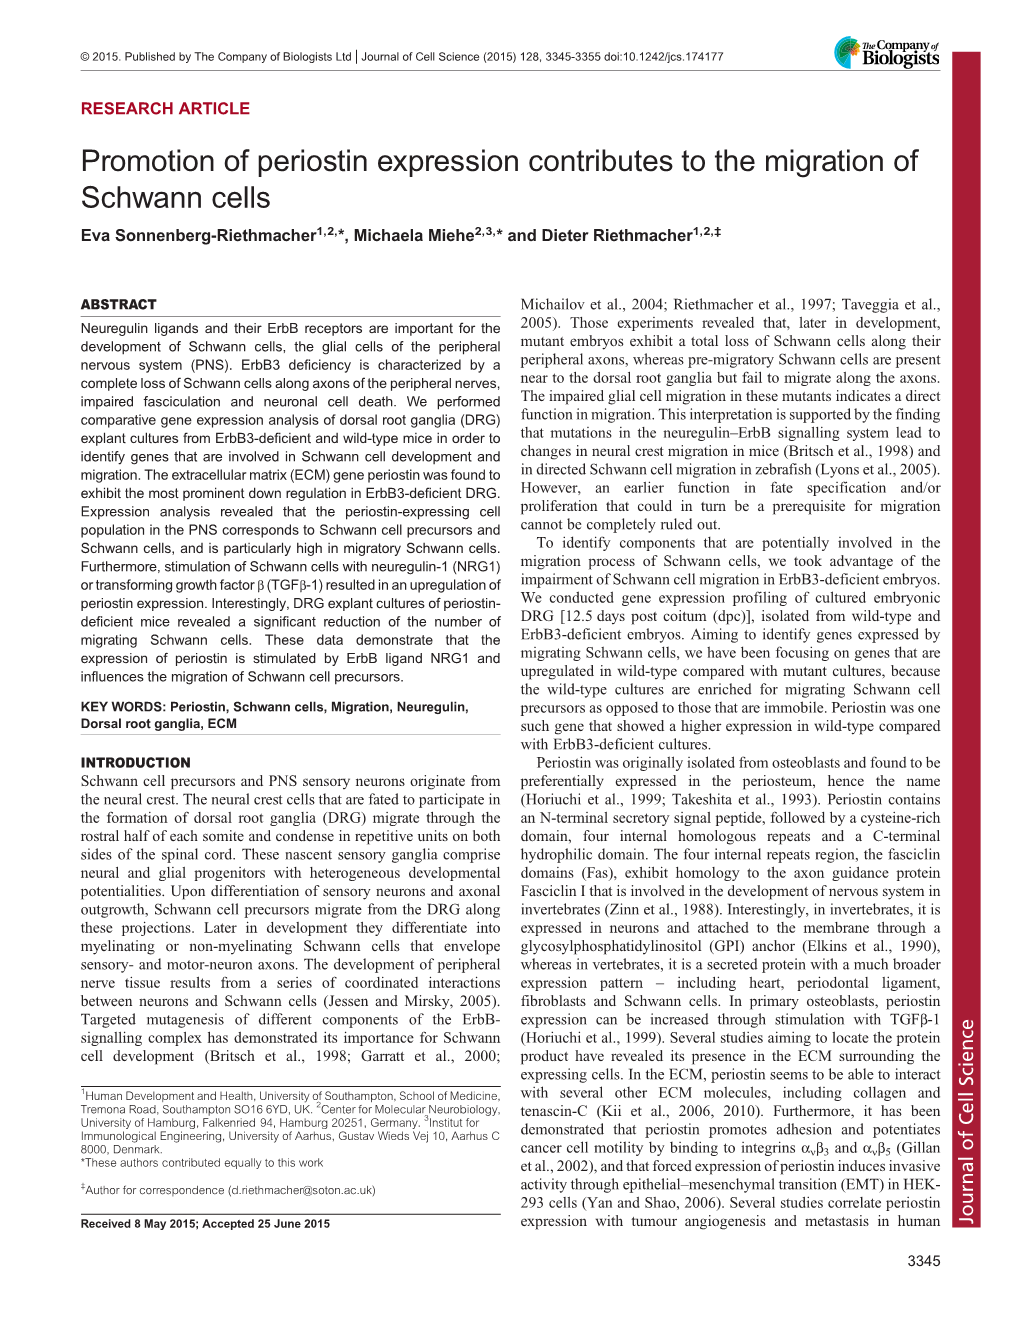 Promotion of Periostin Expression Contributes to the Migration of Schwann Cells Eva Sonnenberg-Riethmacher1,2,*, Michaela Miehe2,3,* and Dieter Riethmacher1,2,‡